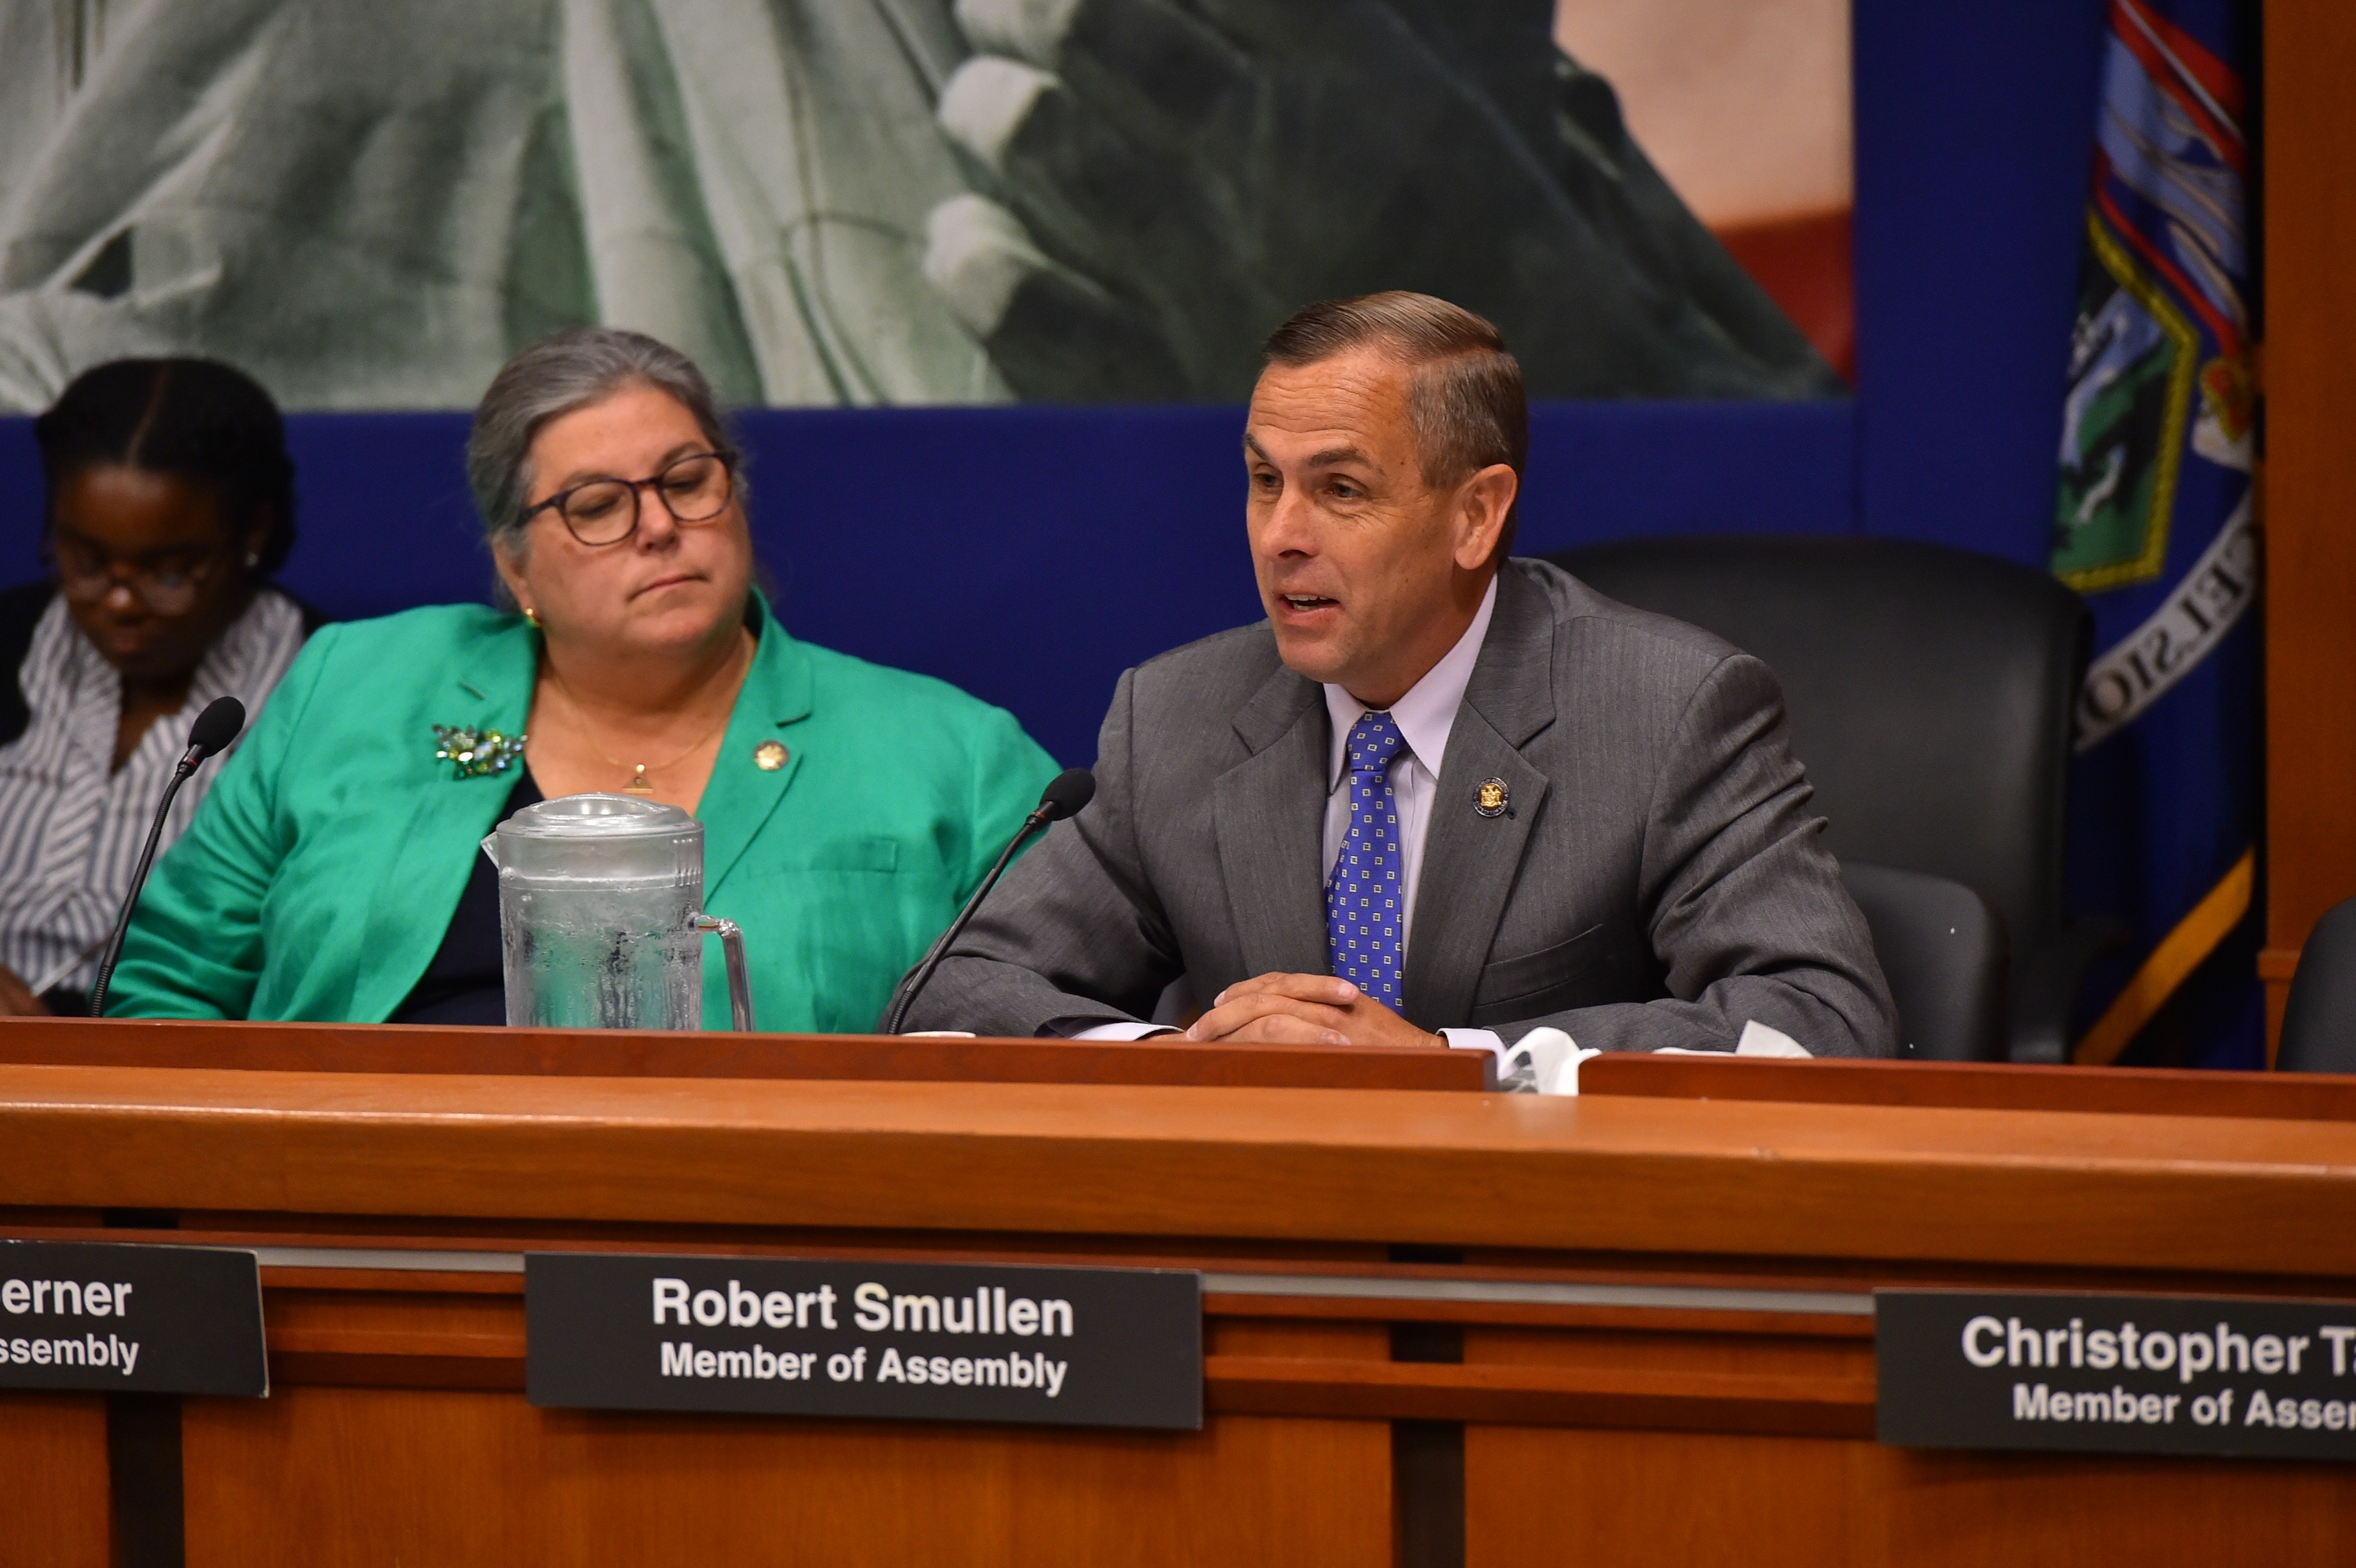 Assemblyman Robert Smullen (R,C,Ref-Meco) today participated in a joint Senate and Assembly Hearing on the status of rural broadband service in New York State.